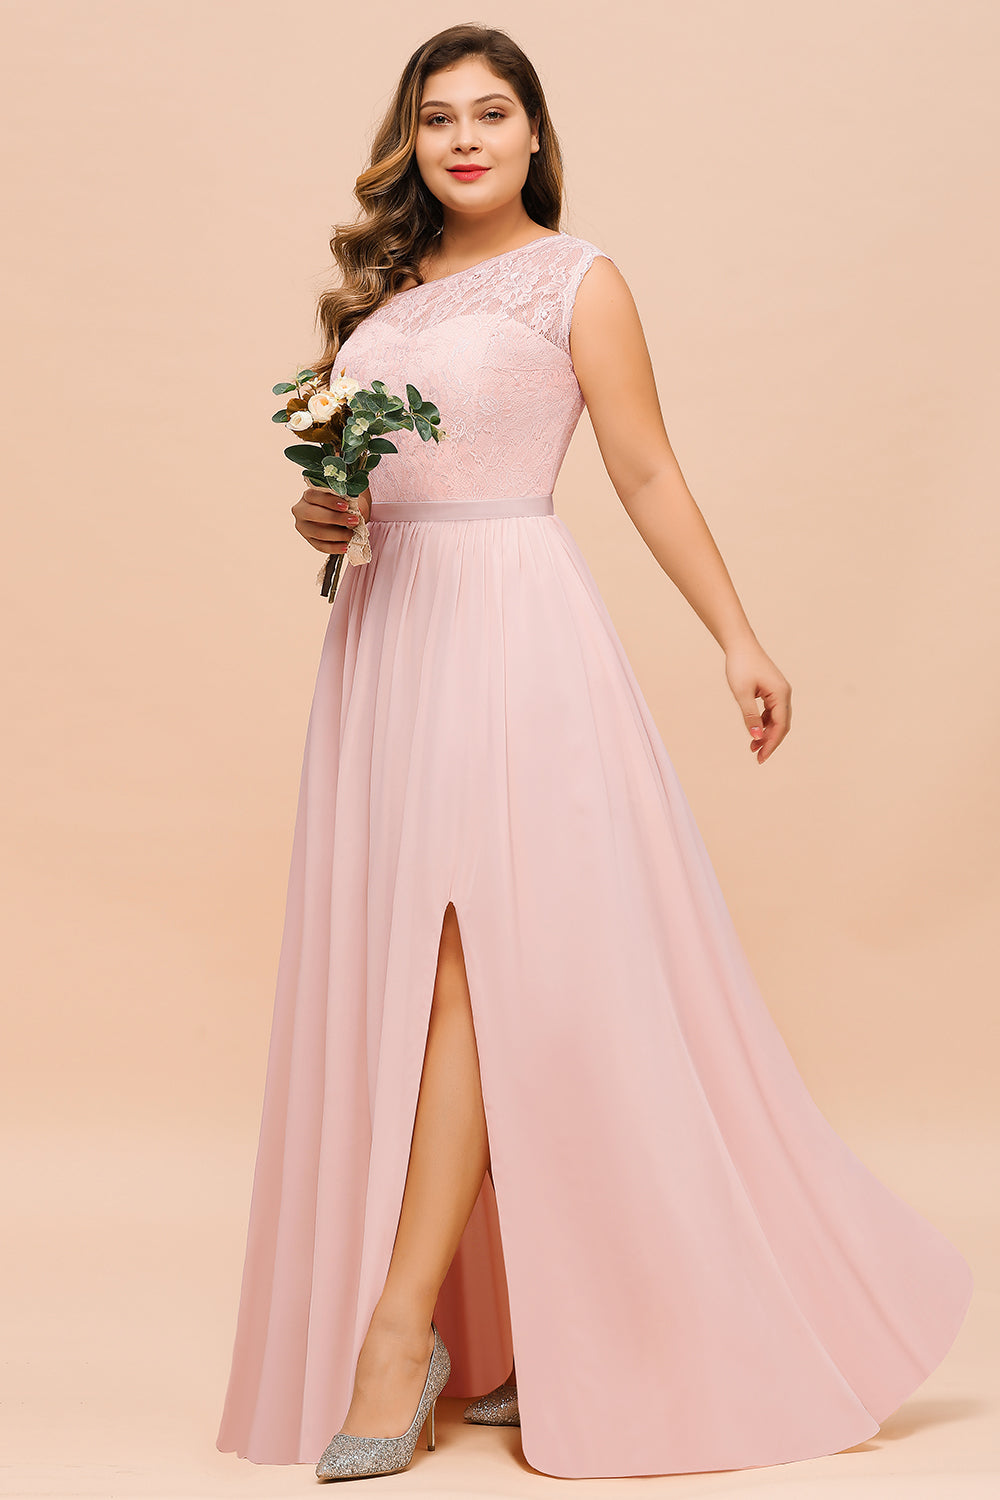 Chic One-Shoulder Pink Lace Bridesmaid Dresses with Slit